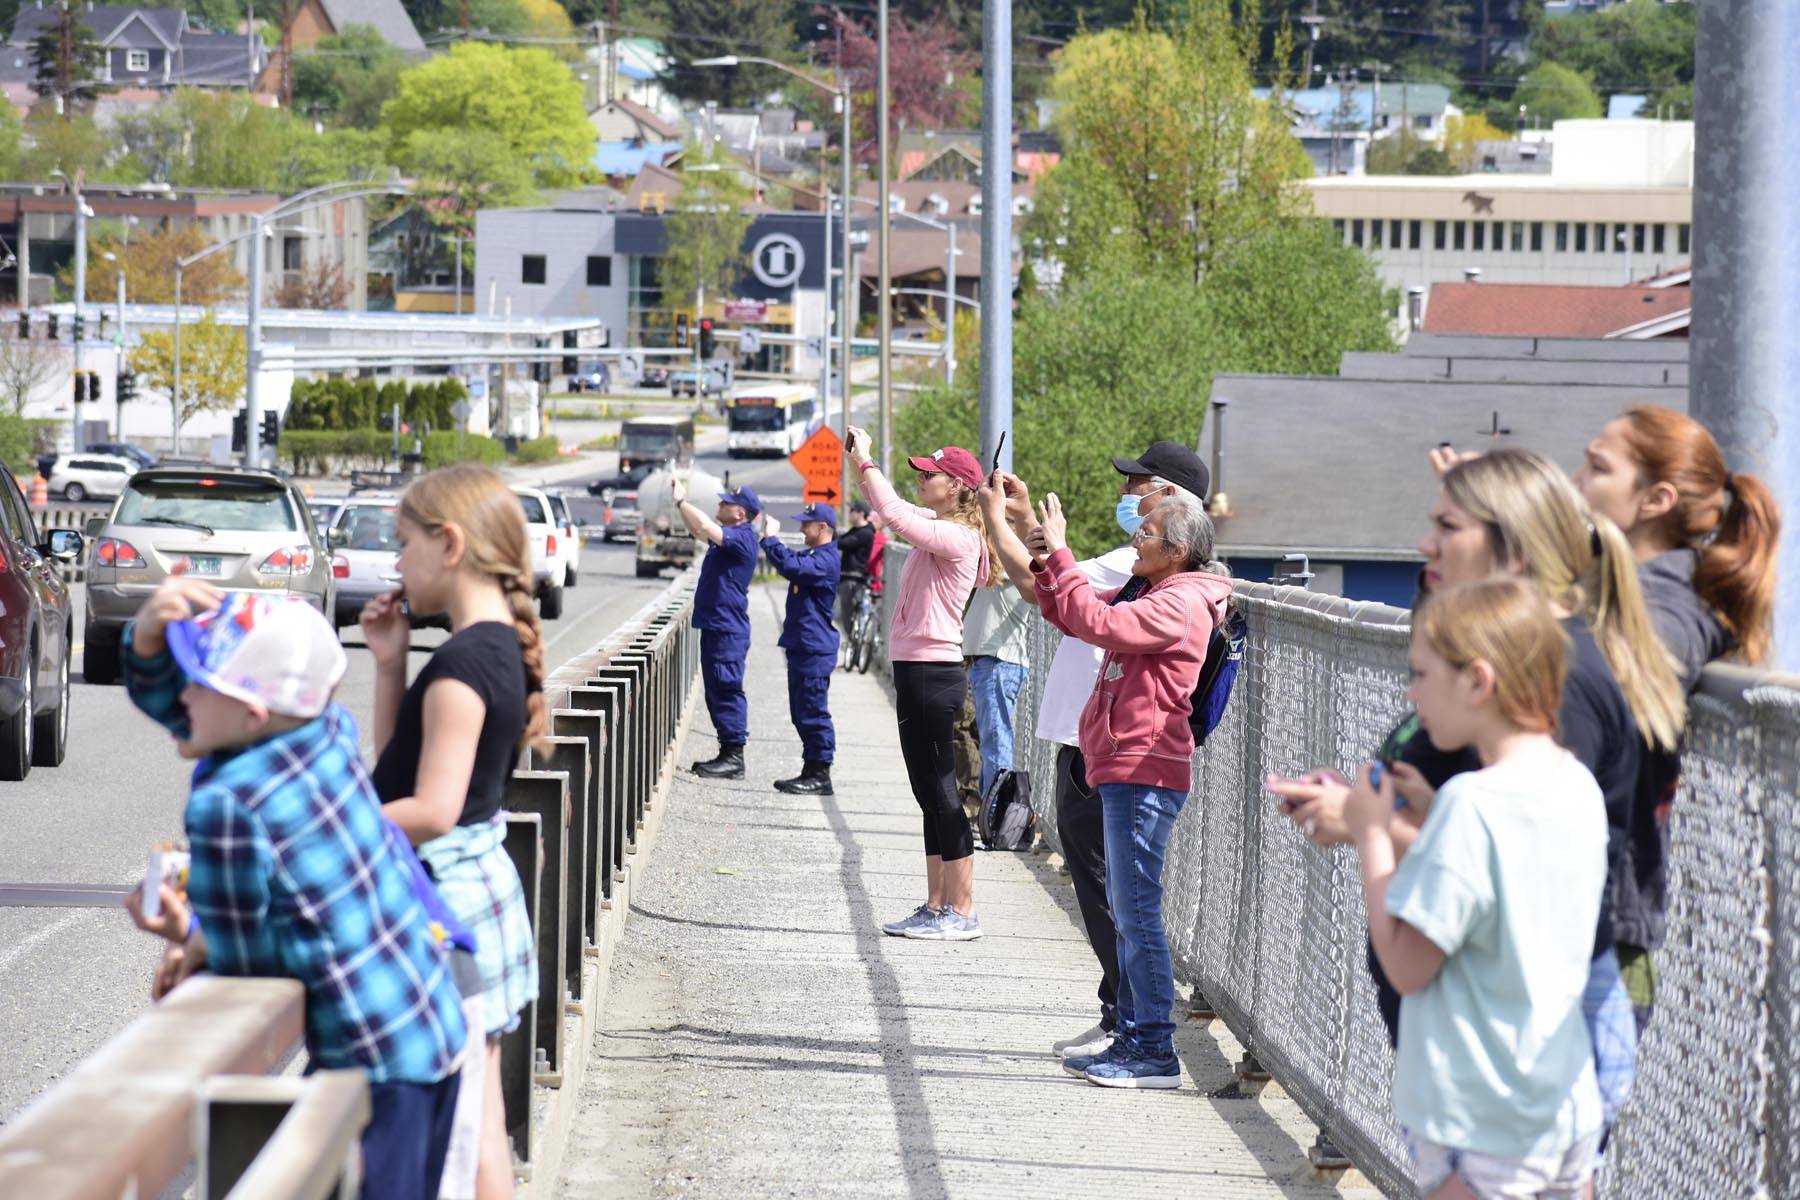 Spectators gathered on the Douglas Bridge to watch C-17 Globemaster III cargo planes from Joint Base Elmendorf-Richardson perform a flyby over Juneau on May 15, 2020, in support of the efforts of medical and emergency personnel in the face of the coronavirus. (Peter Segall | Juneau Empire)